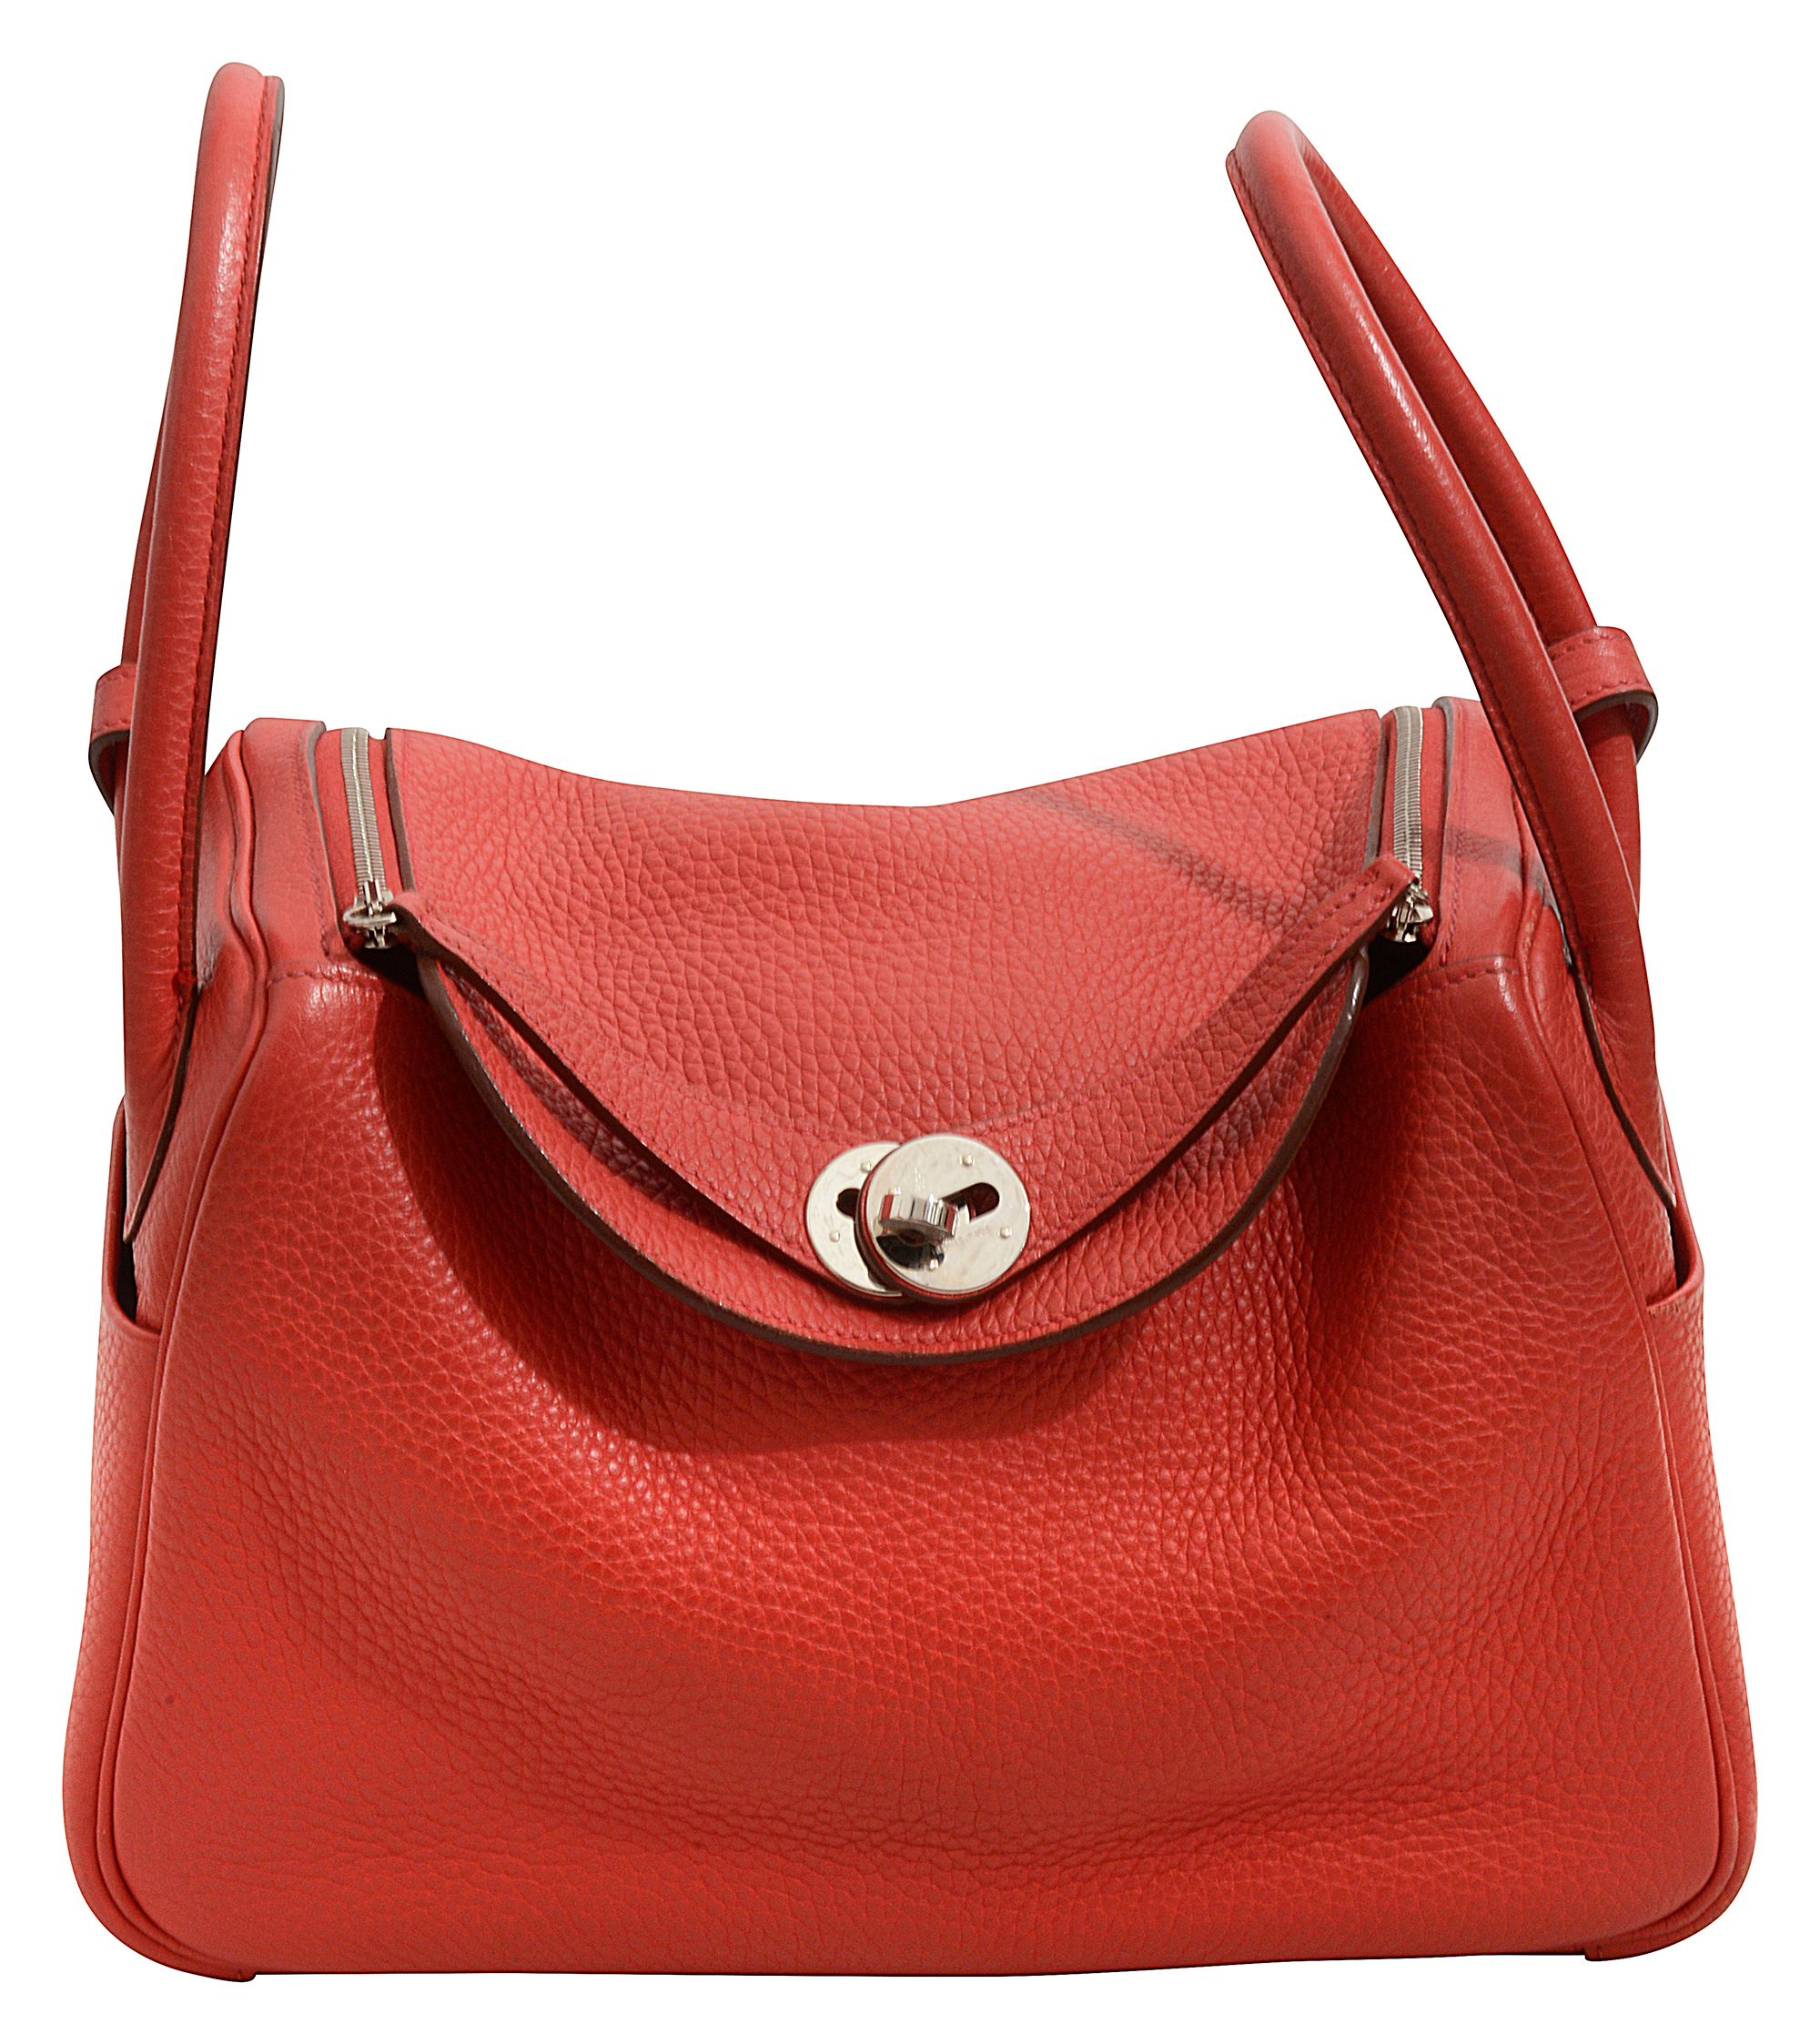 An Hermes Lindy 26 Bourgainvillea Clemence